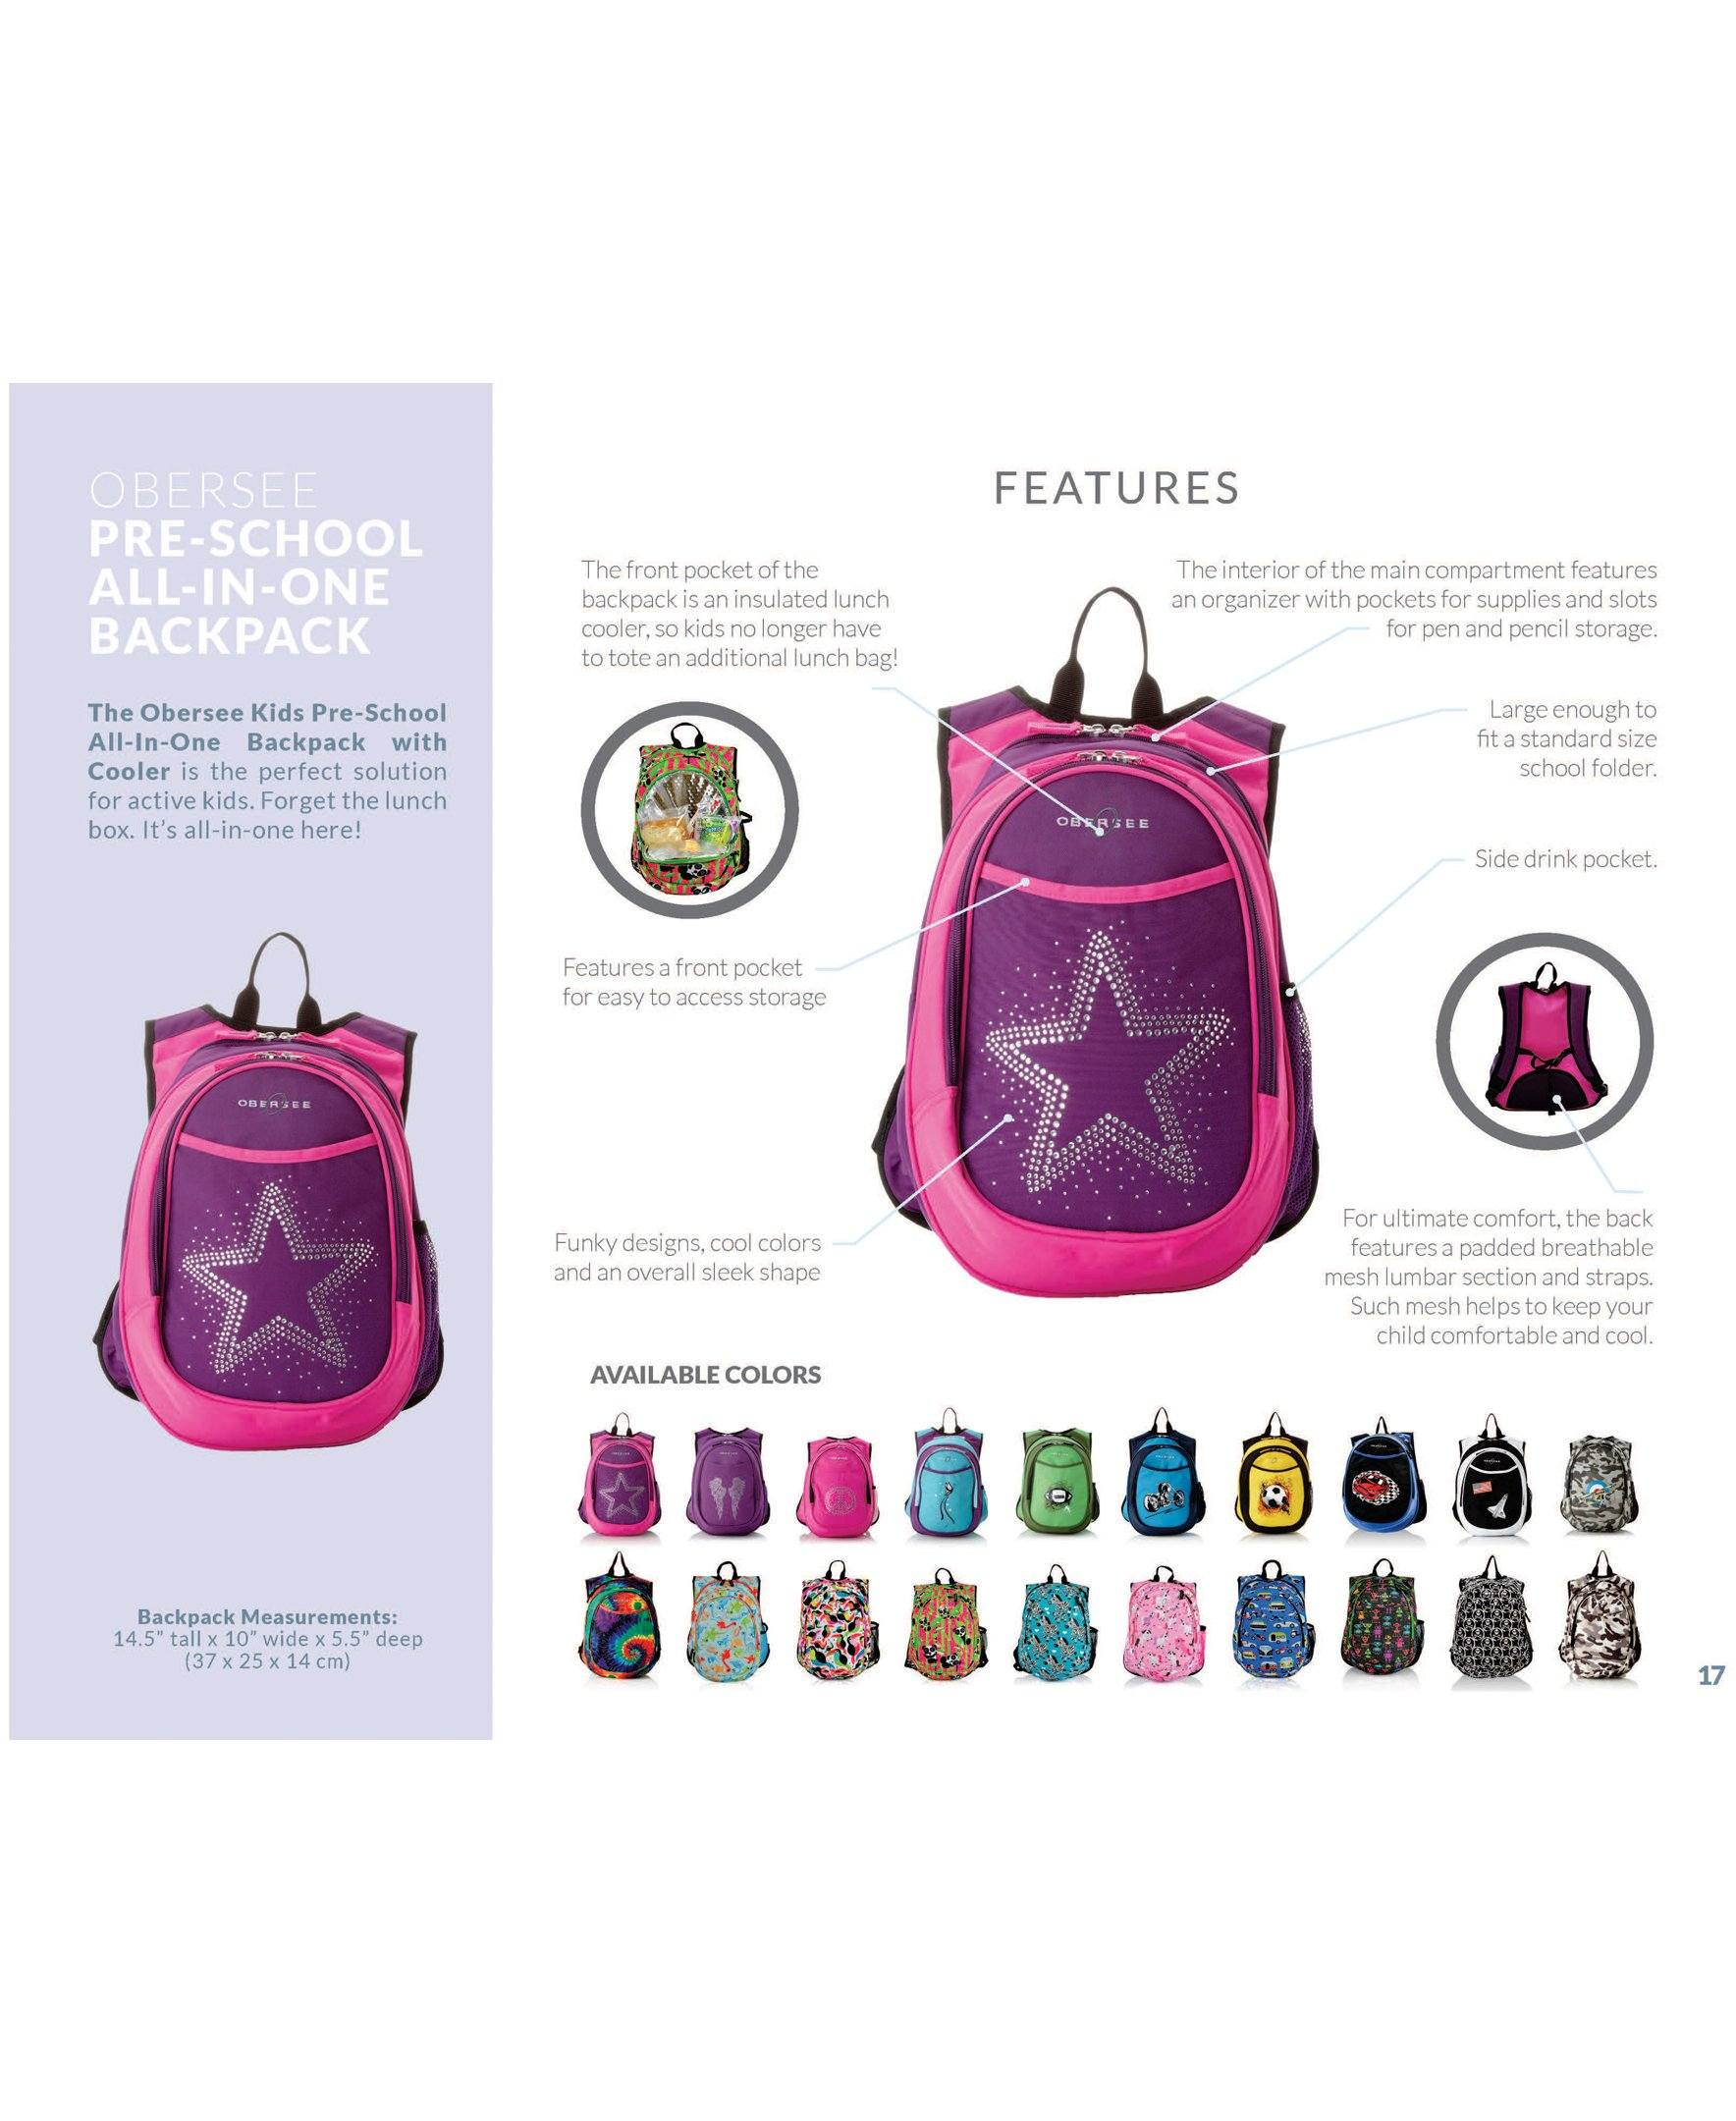 O3KCBP017 Obersee Mini Preschool All-in-One Backpack for Toddlers and Kids with integrated Insulated Cooler - image 4 of 4